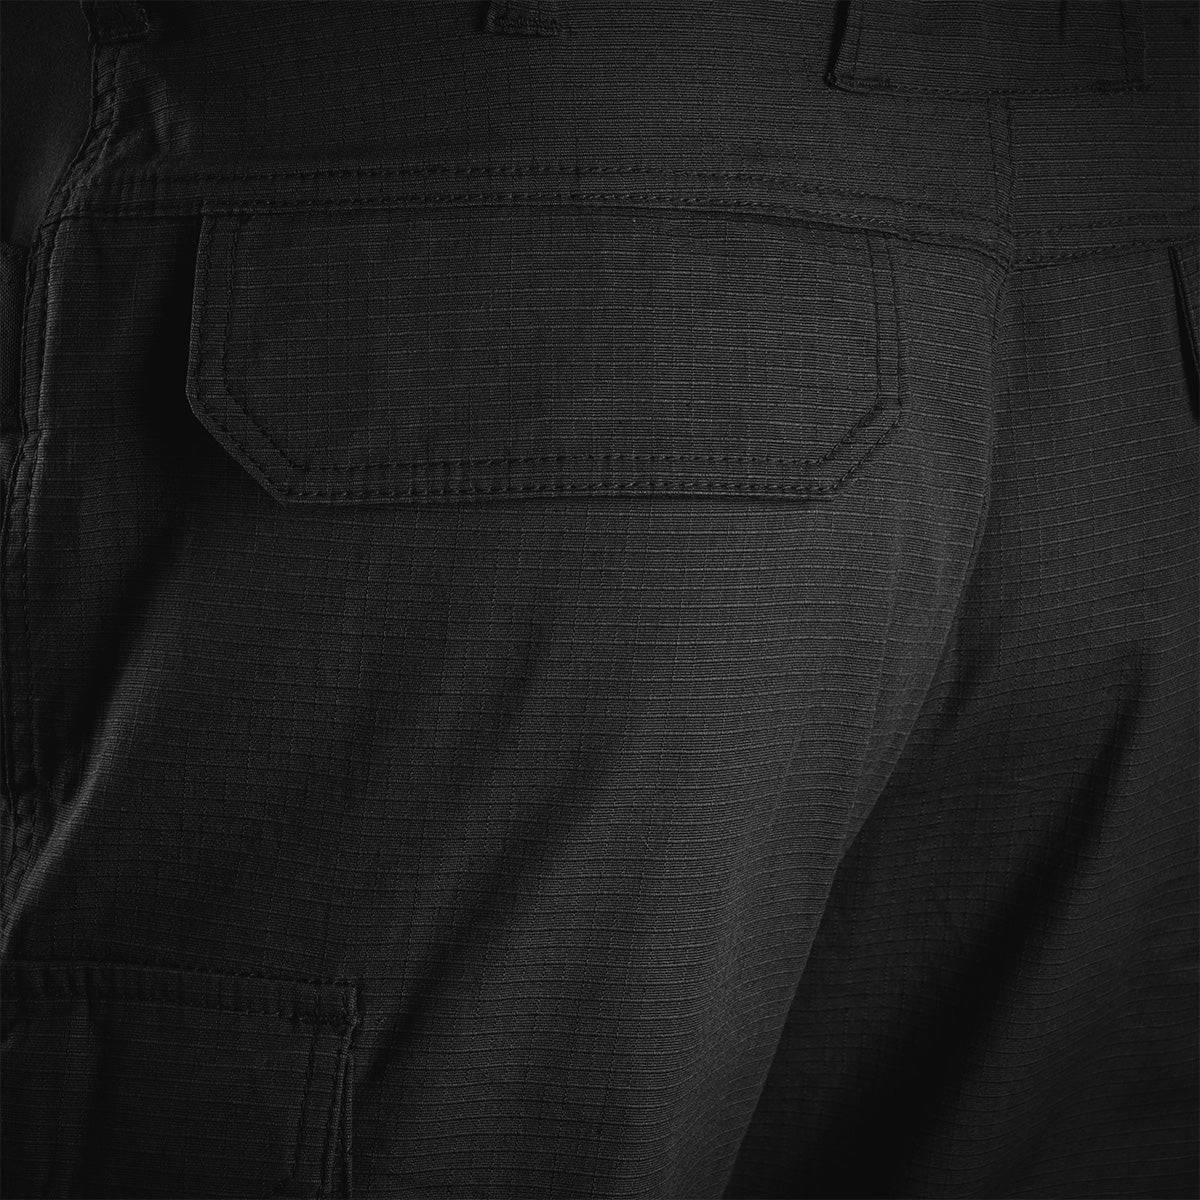 Stoirm Tactical Ripstop Trousers - John Bull Clothing